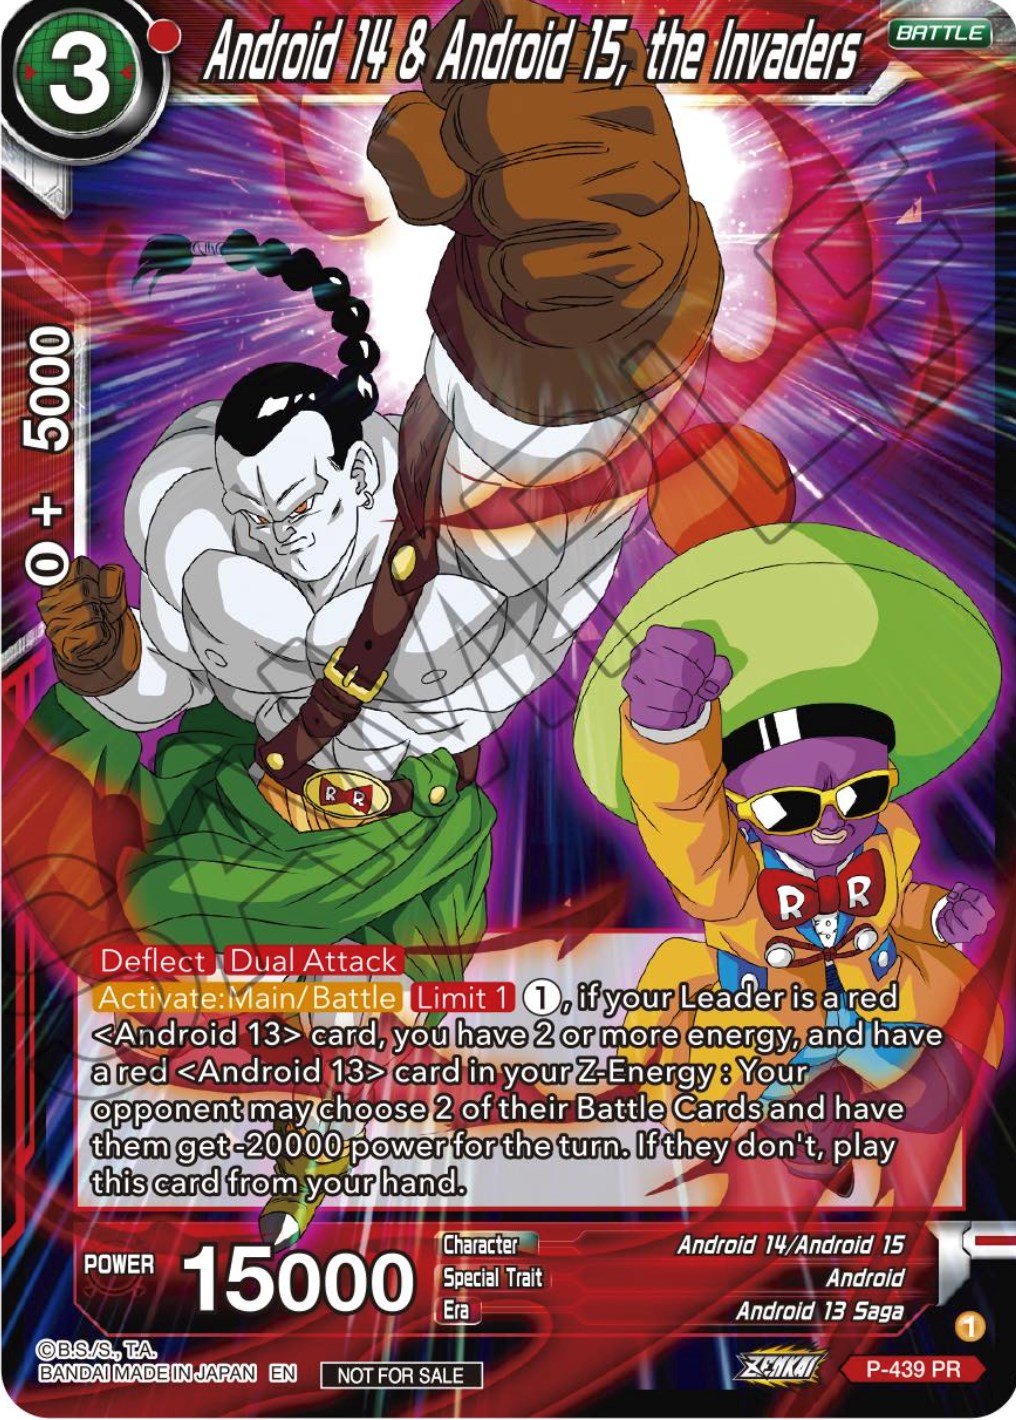 Android 14 & Android 15, the Invaders (Zenkai Series Tournament Pack Vol.2) (P-439) [Tournament Promotion Cards] | Black Swamp Games